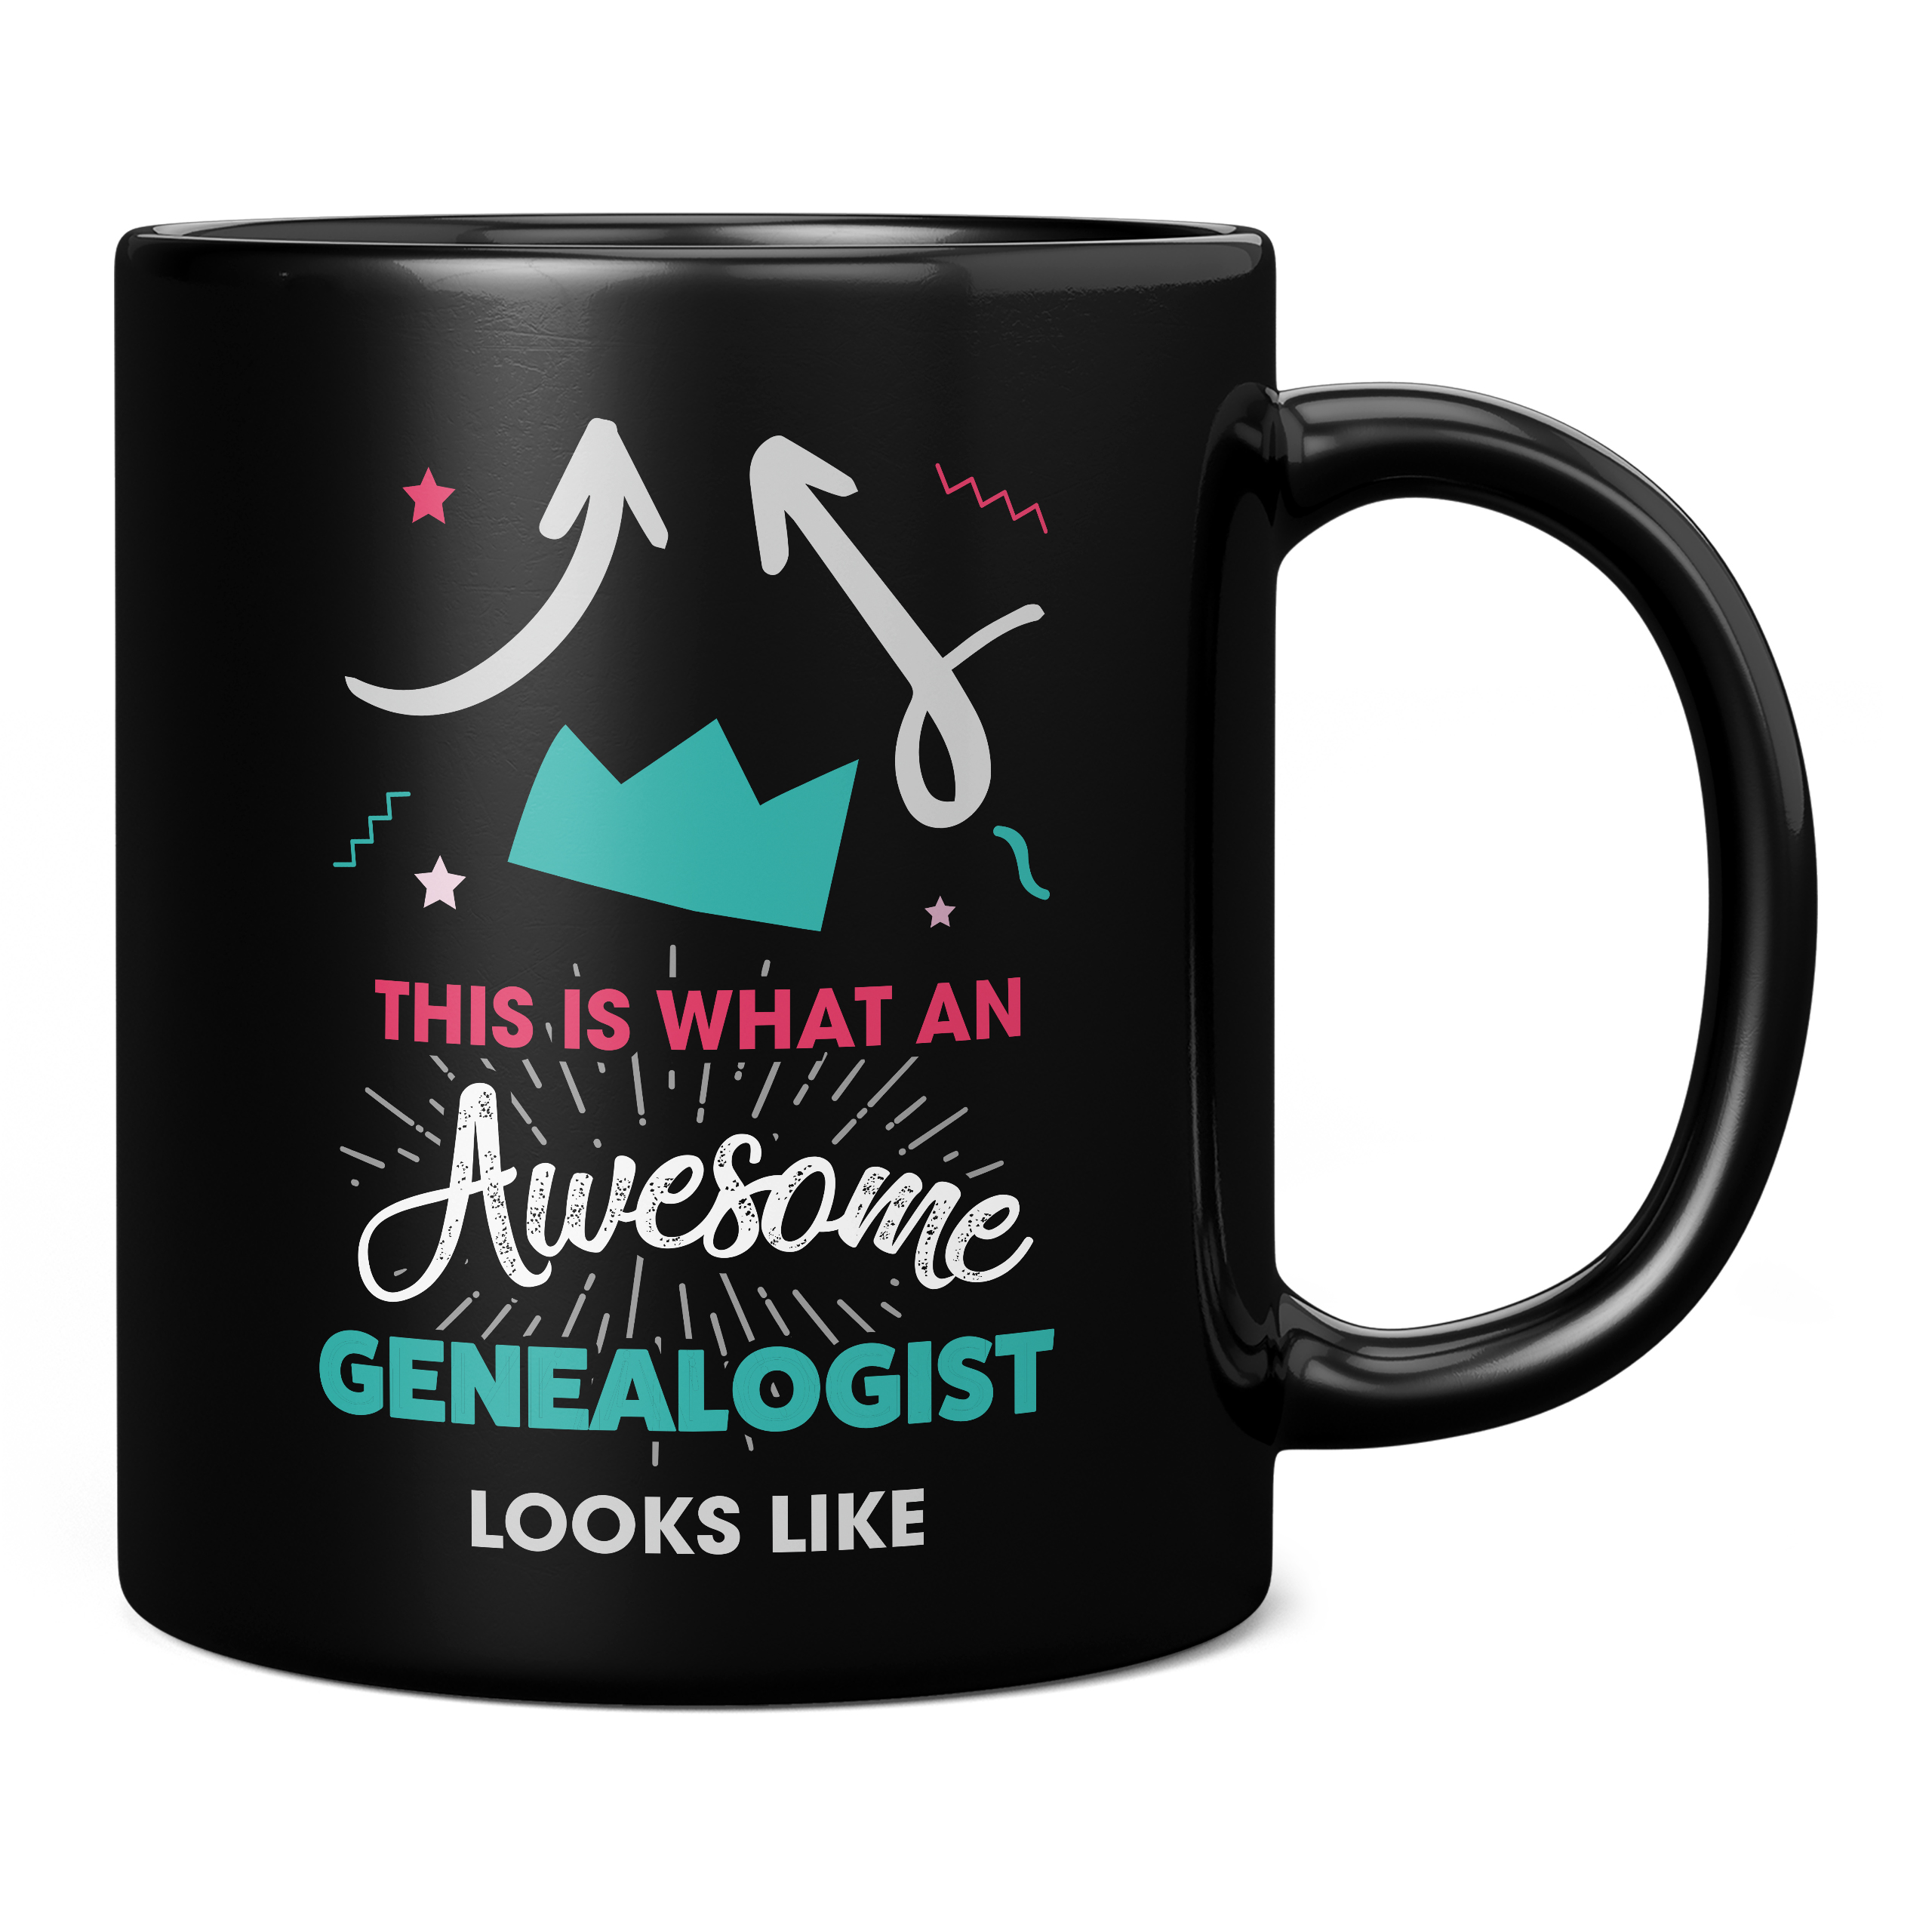 THIS IS WHAT AN AWESOME GENEALOGIST LOOKS LIKE 11OZ NOVELTY MUG